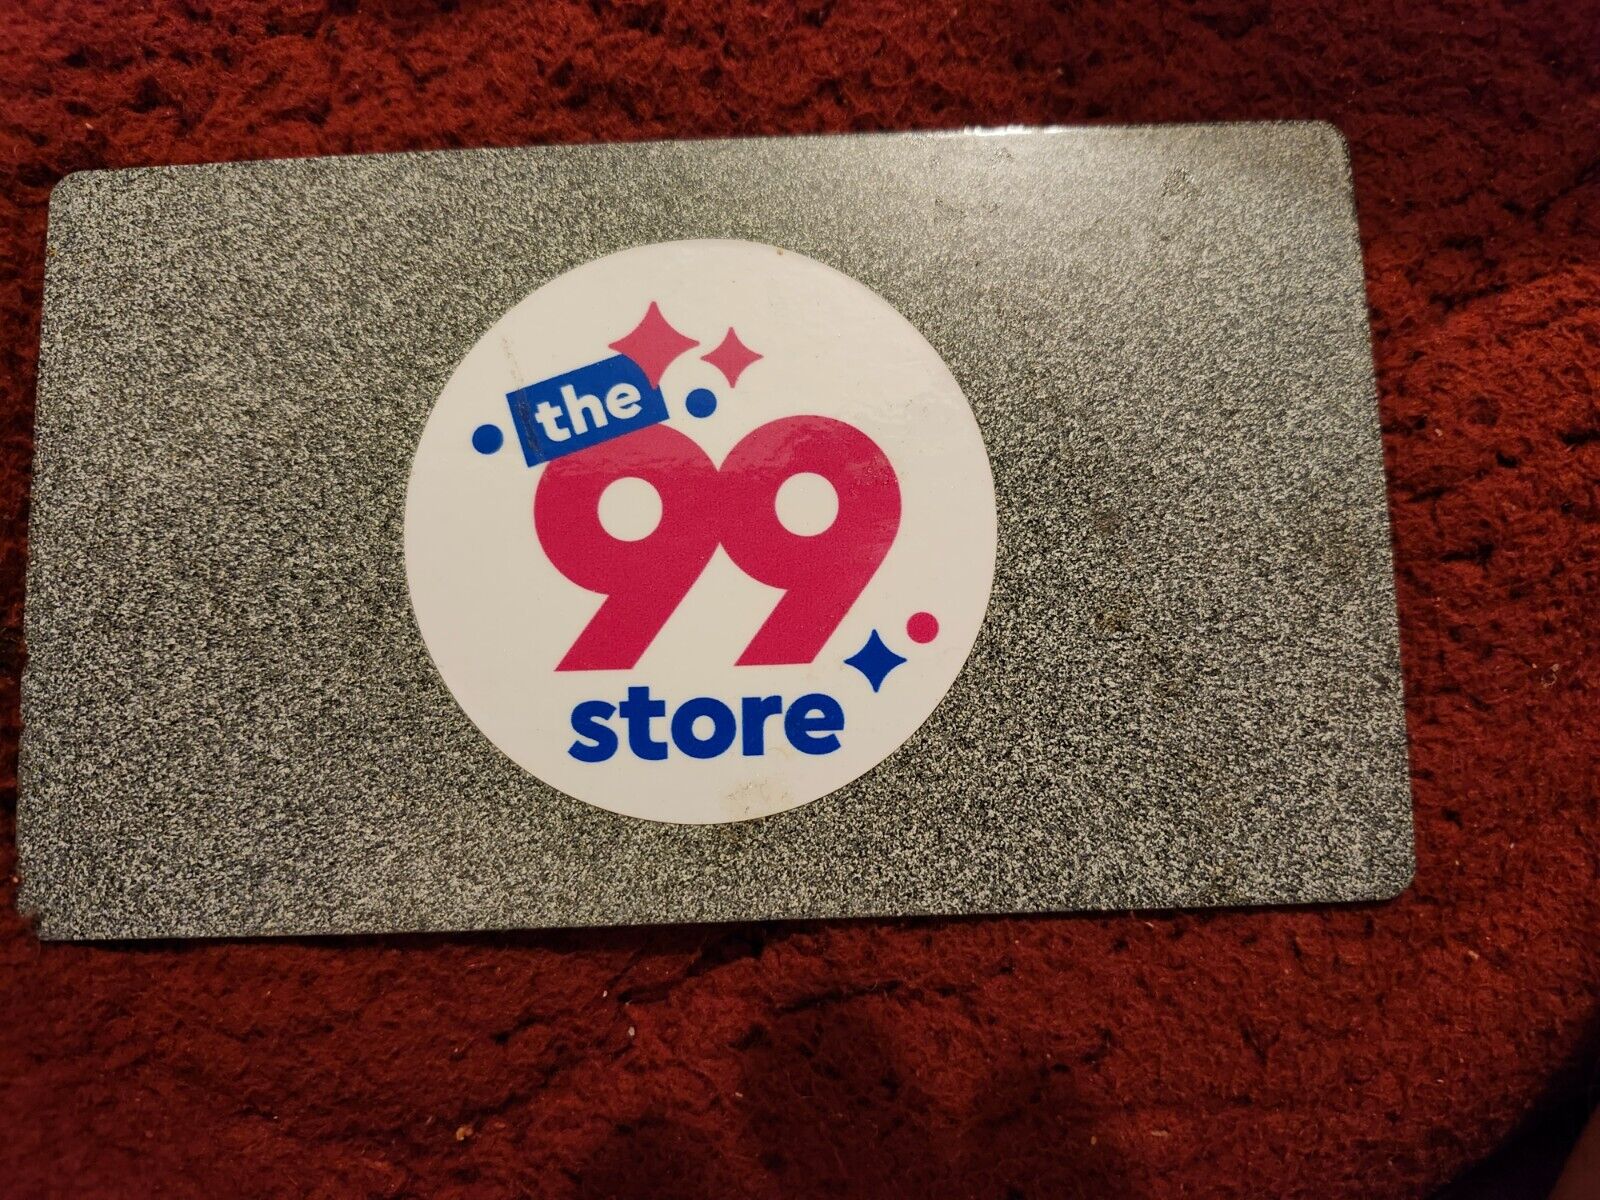 99 CENTS ONLY STORE - RARE STORE plate from a shopping cart.